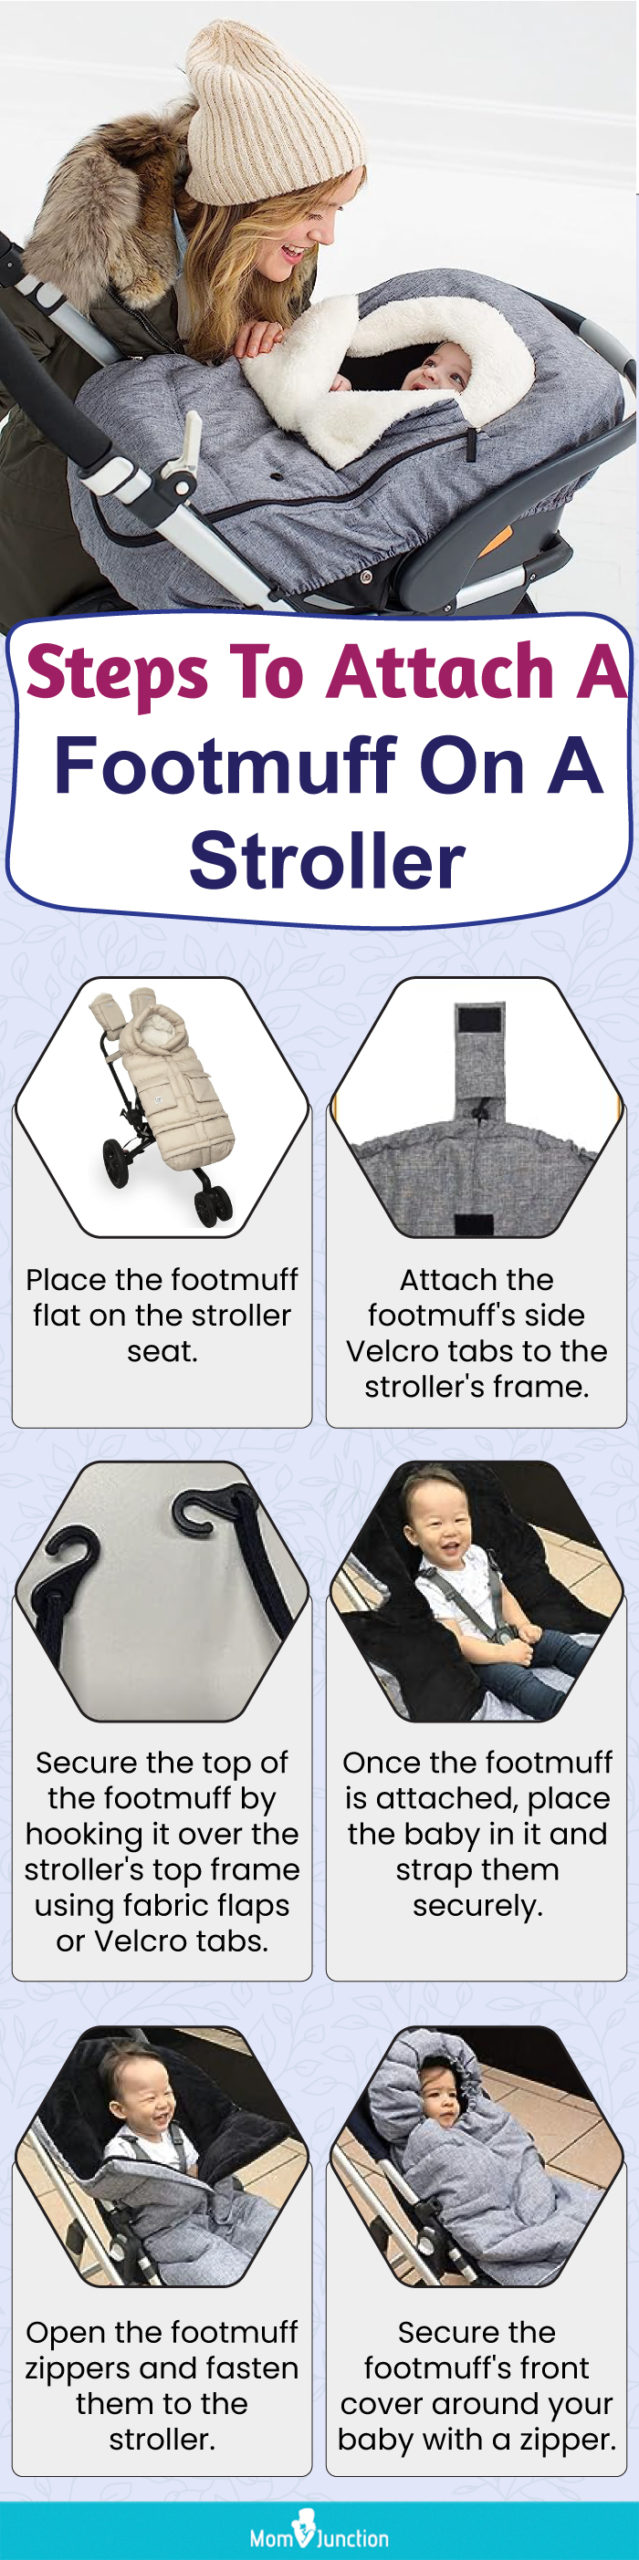 Steps To Attach A Footmuff On A Stroller (infographic)